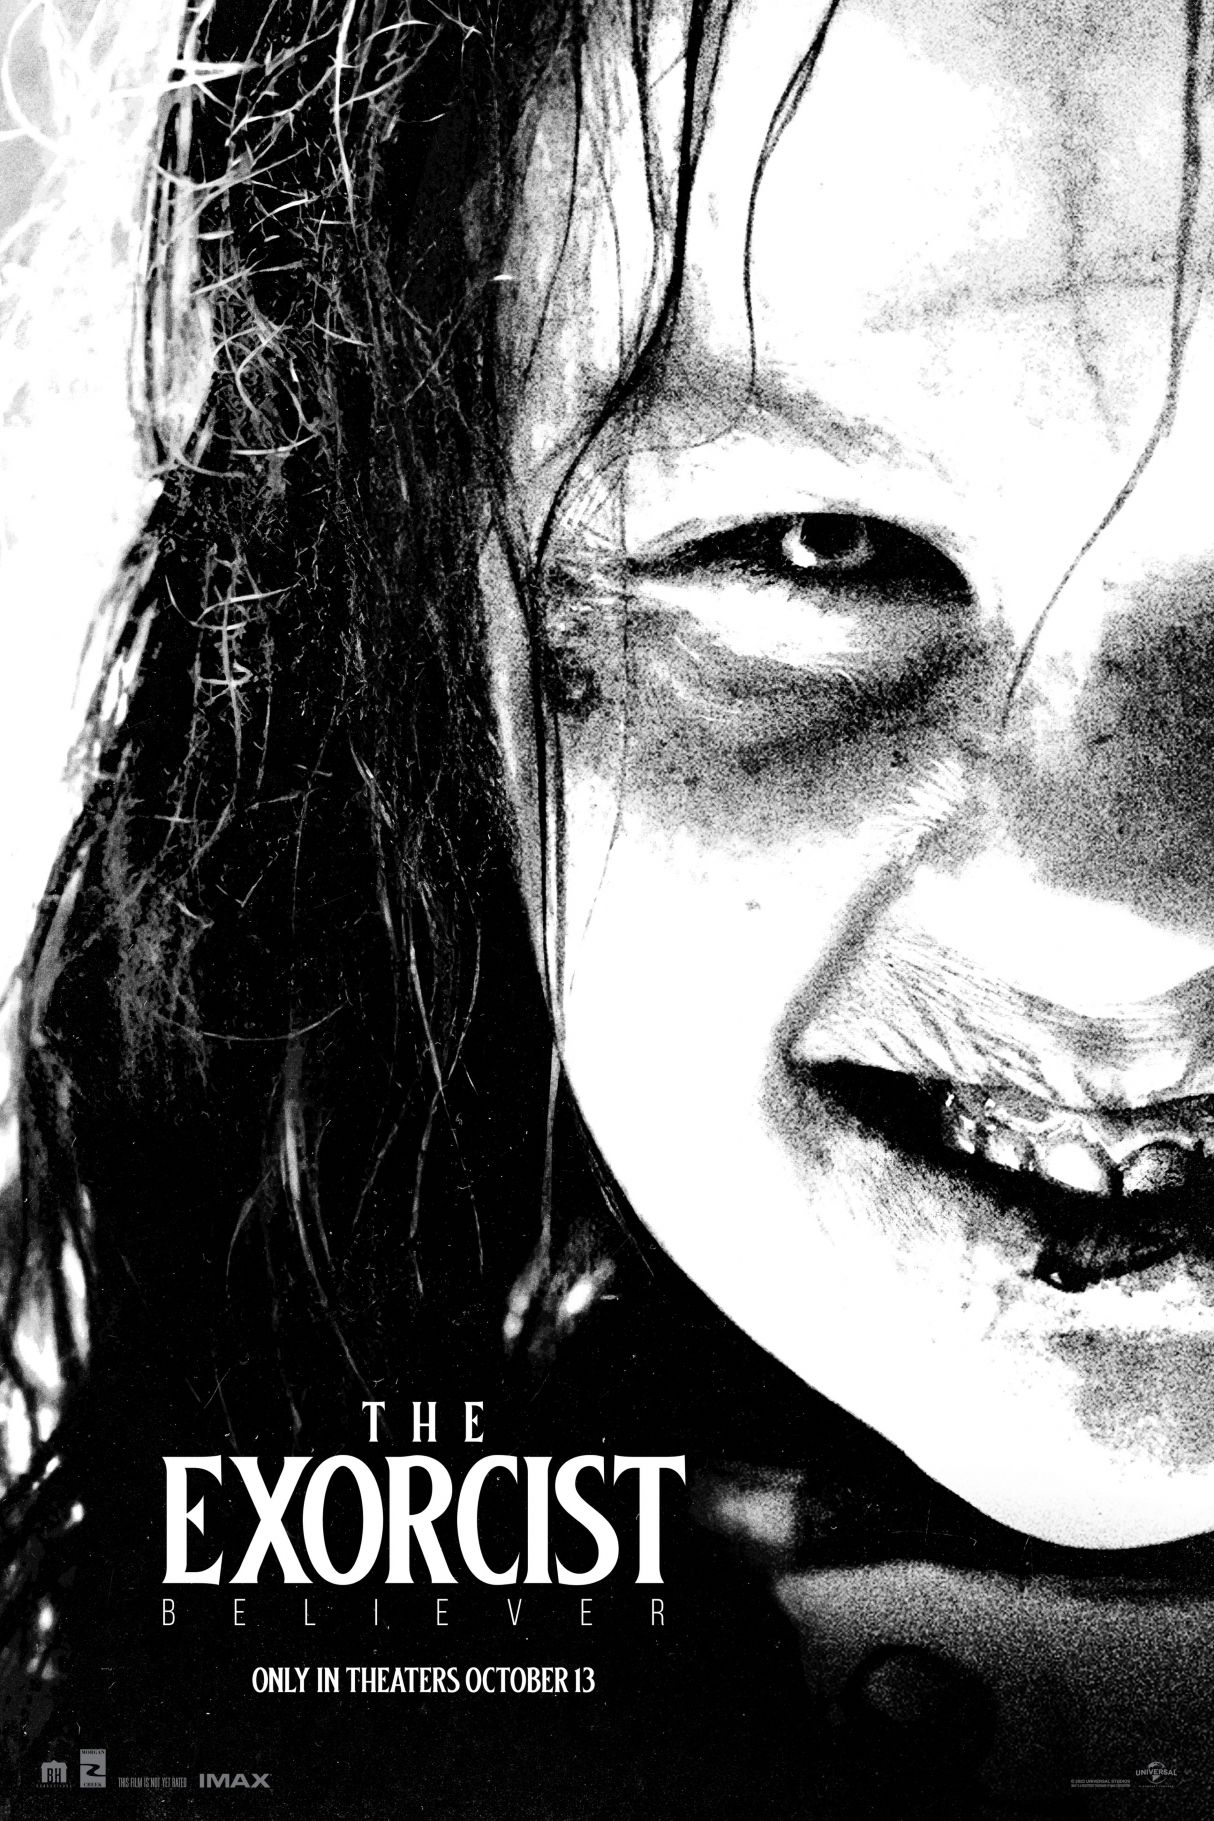 The Exorcist Believer Streaming Release Date Announced (And It's Very